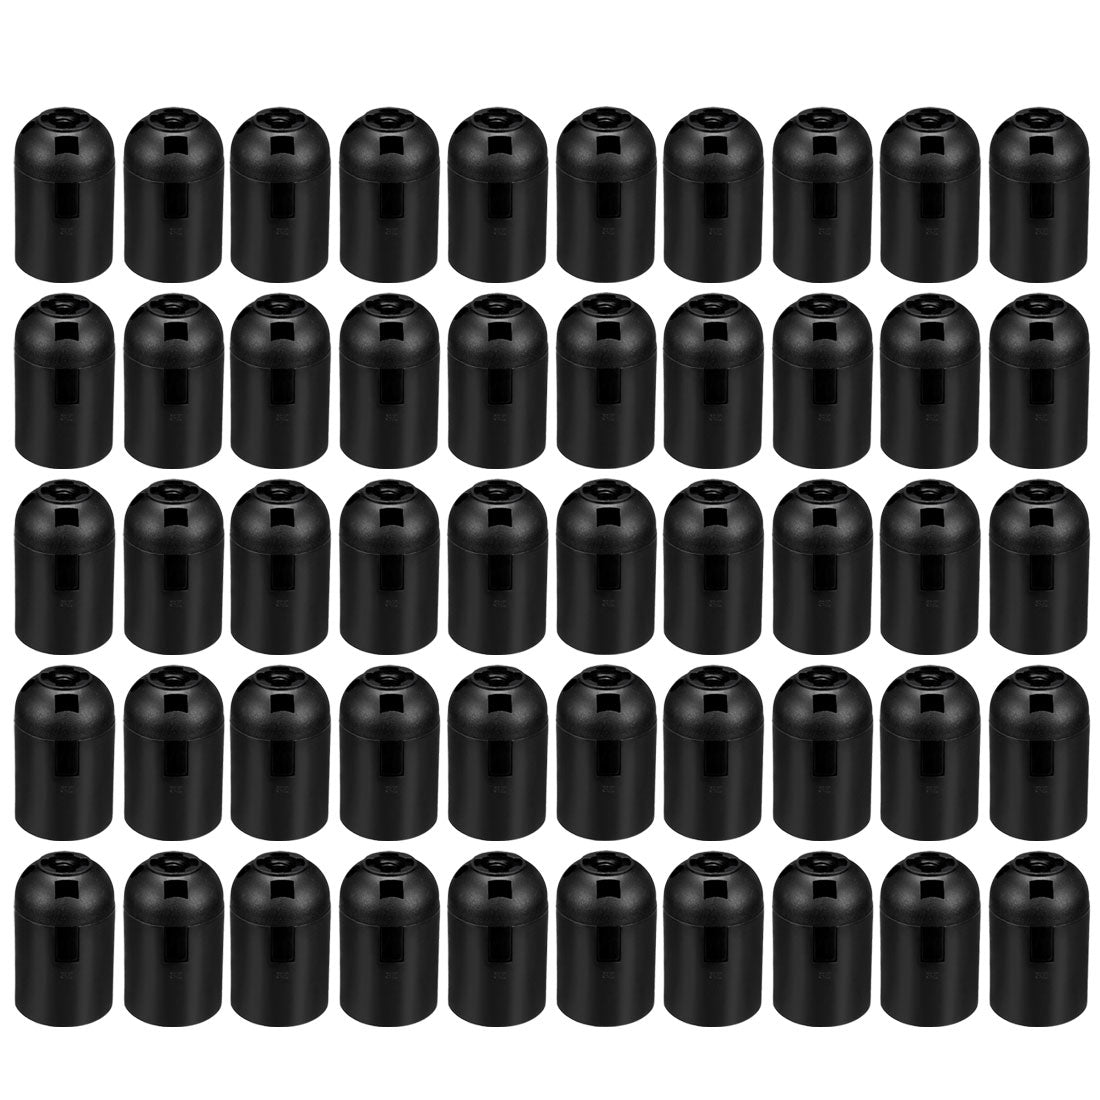 uxcell Uxcell 50Pcs 4A E27 Light Socket Screw Bulb Retro Pendant LED Lamp Holder Without Switch Plastic Black for DIY Projects